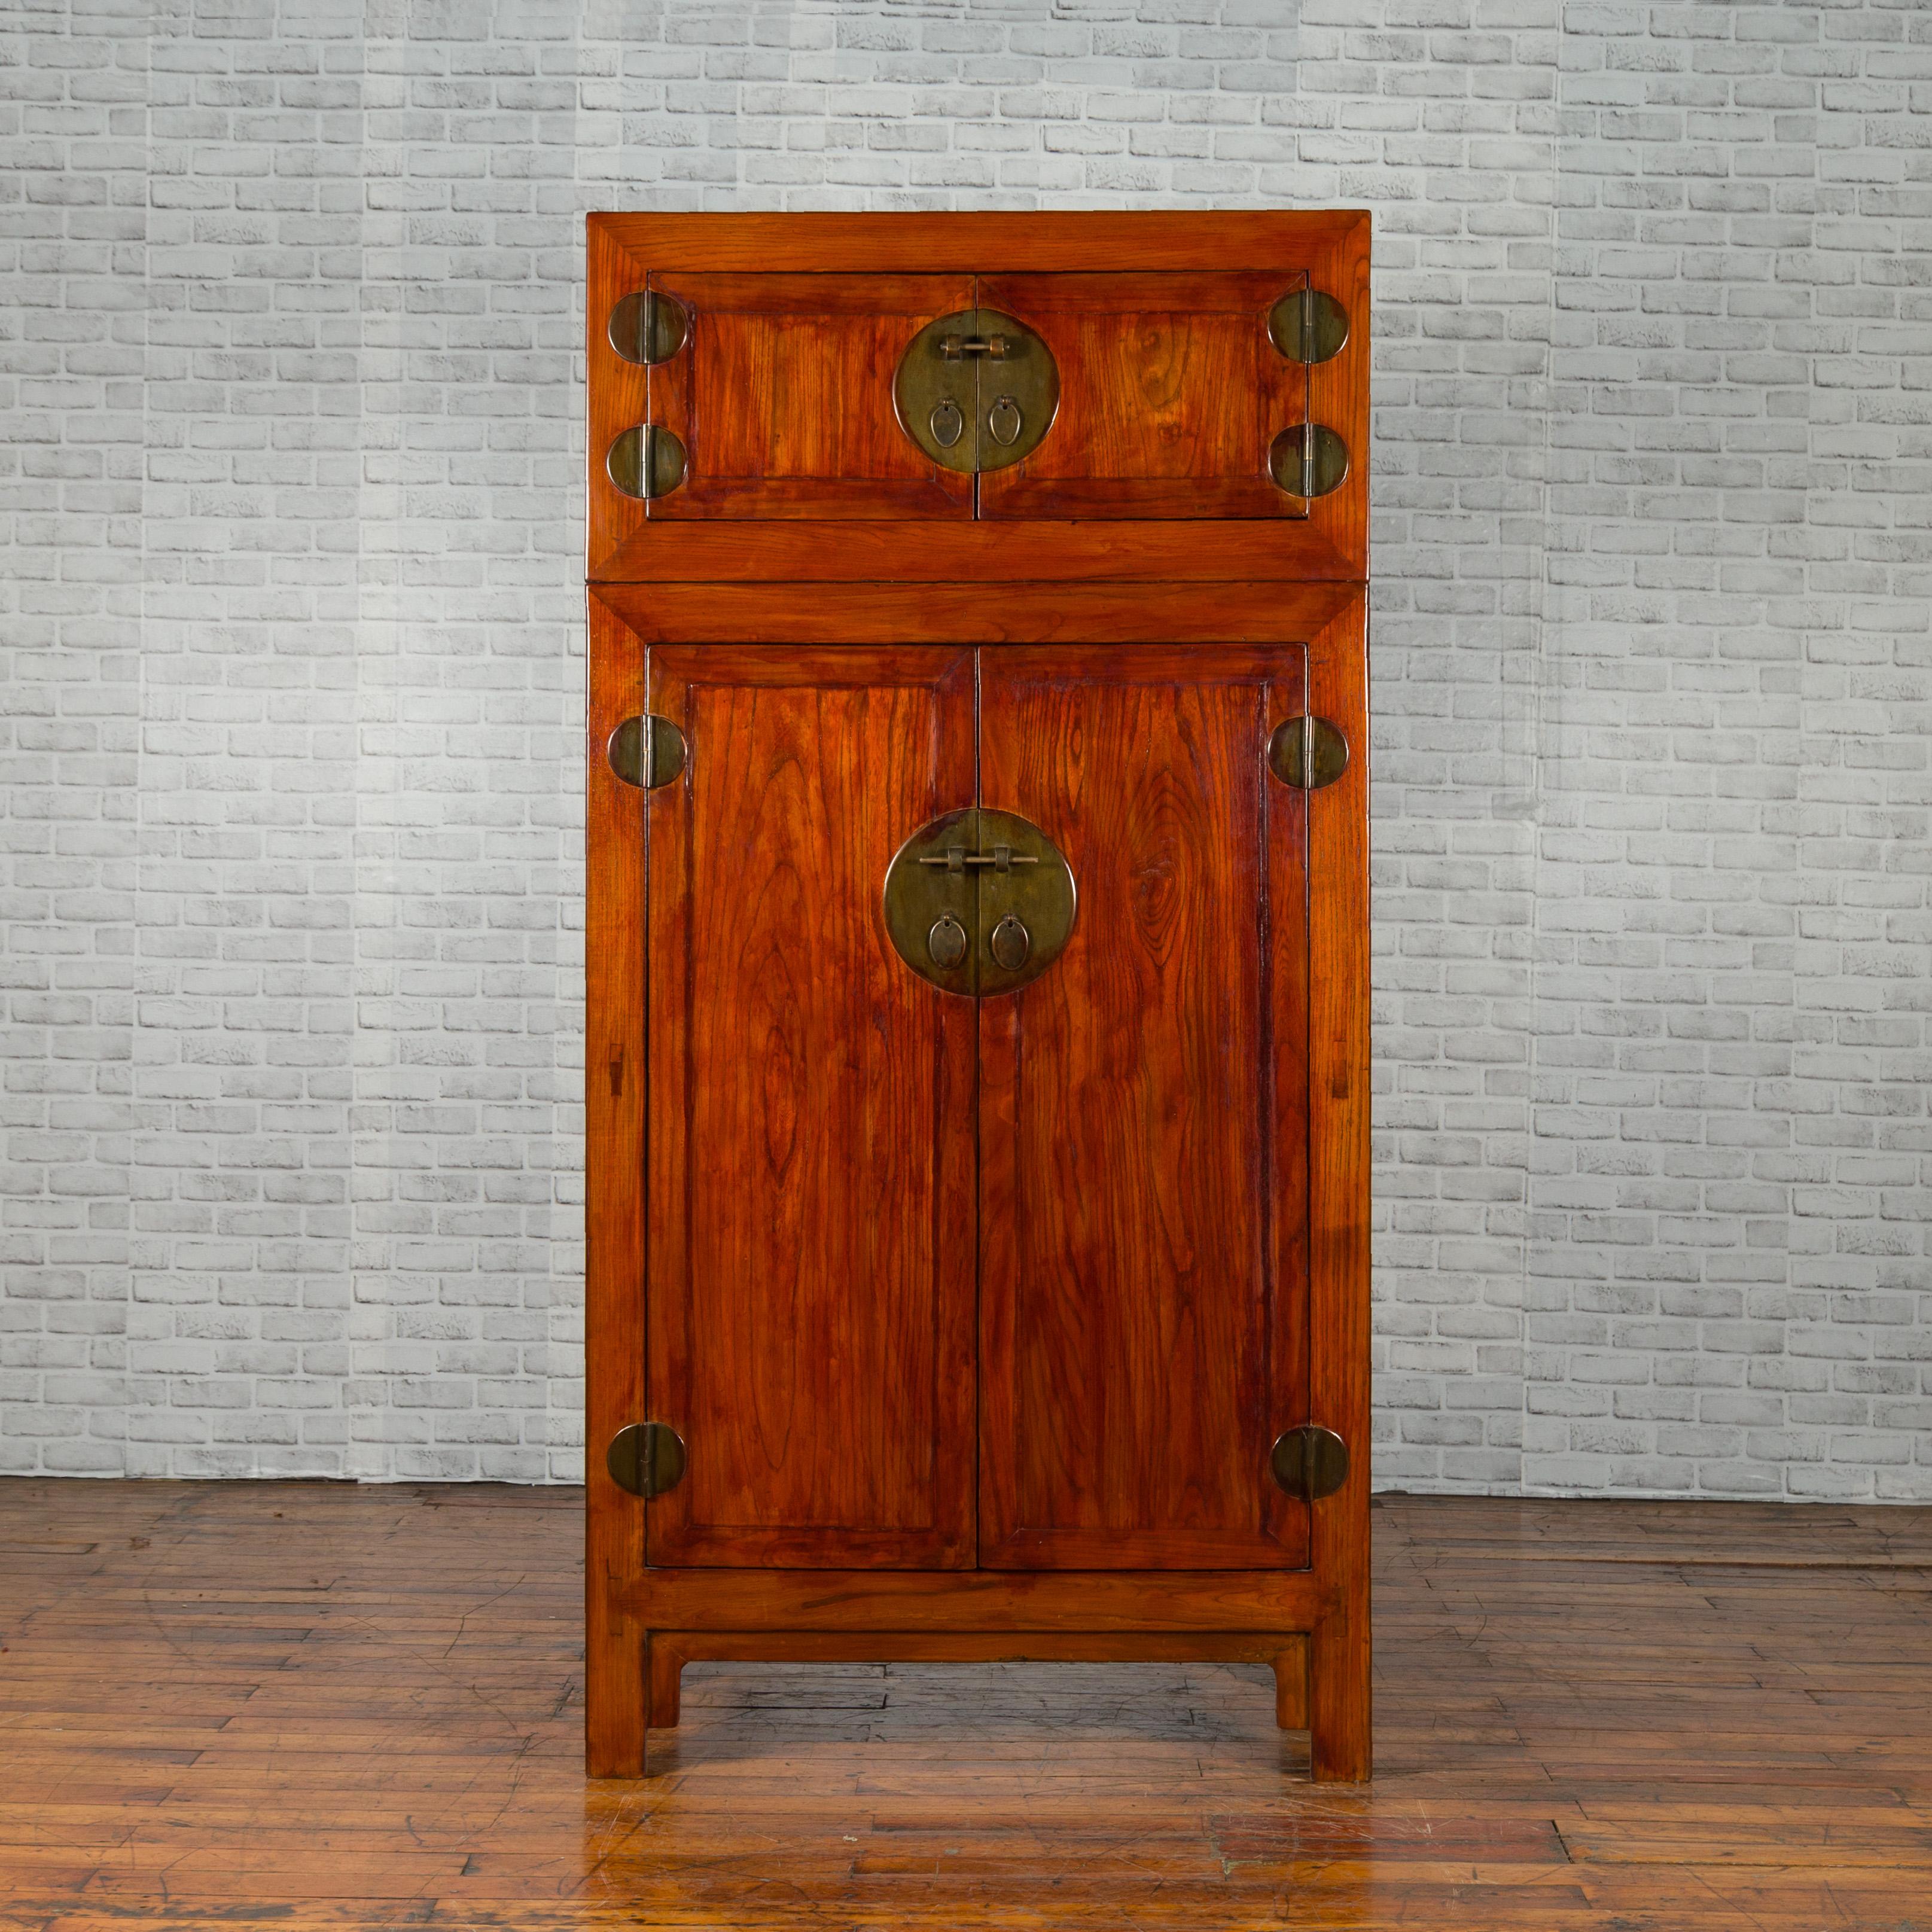 A Chinese Qing Dynasty period compound elm cabinet from the 19th century, with reddish brown lacquer and traditional brass hardware. Created in China during the Qing Dynasty, this compound two-piece cabinet features a linear silhouette perfectly